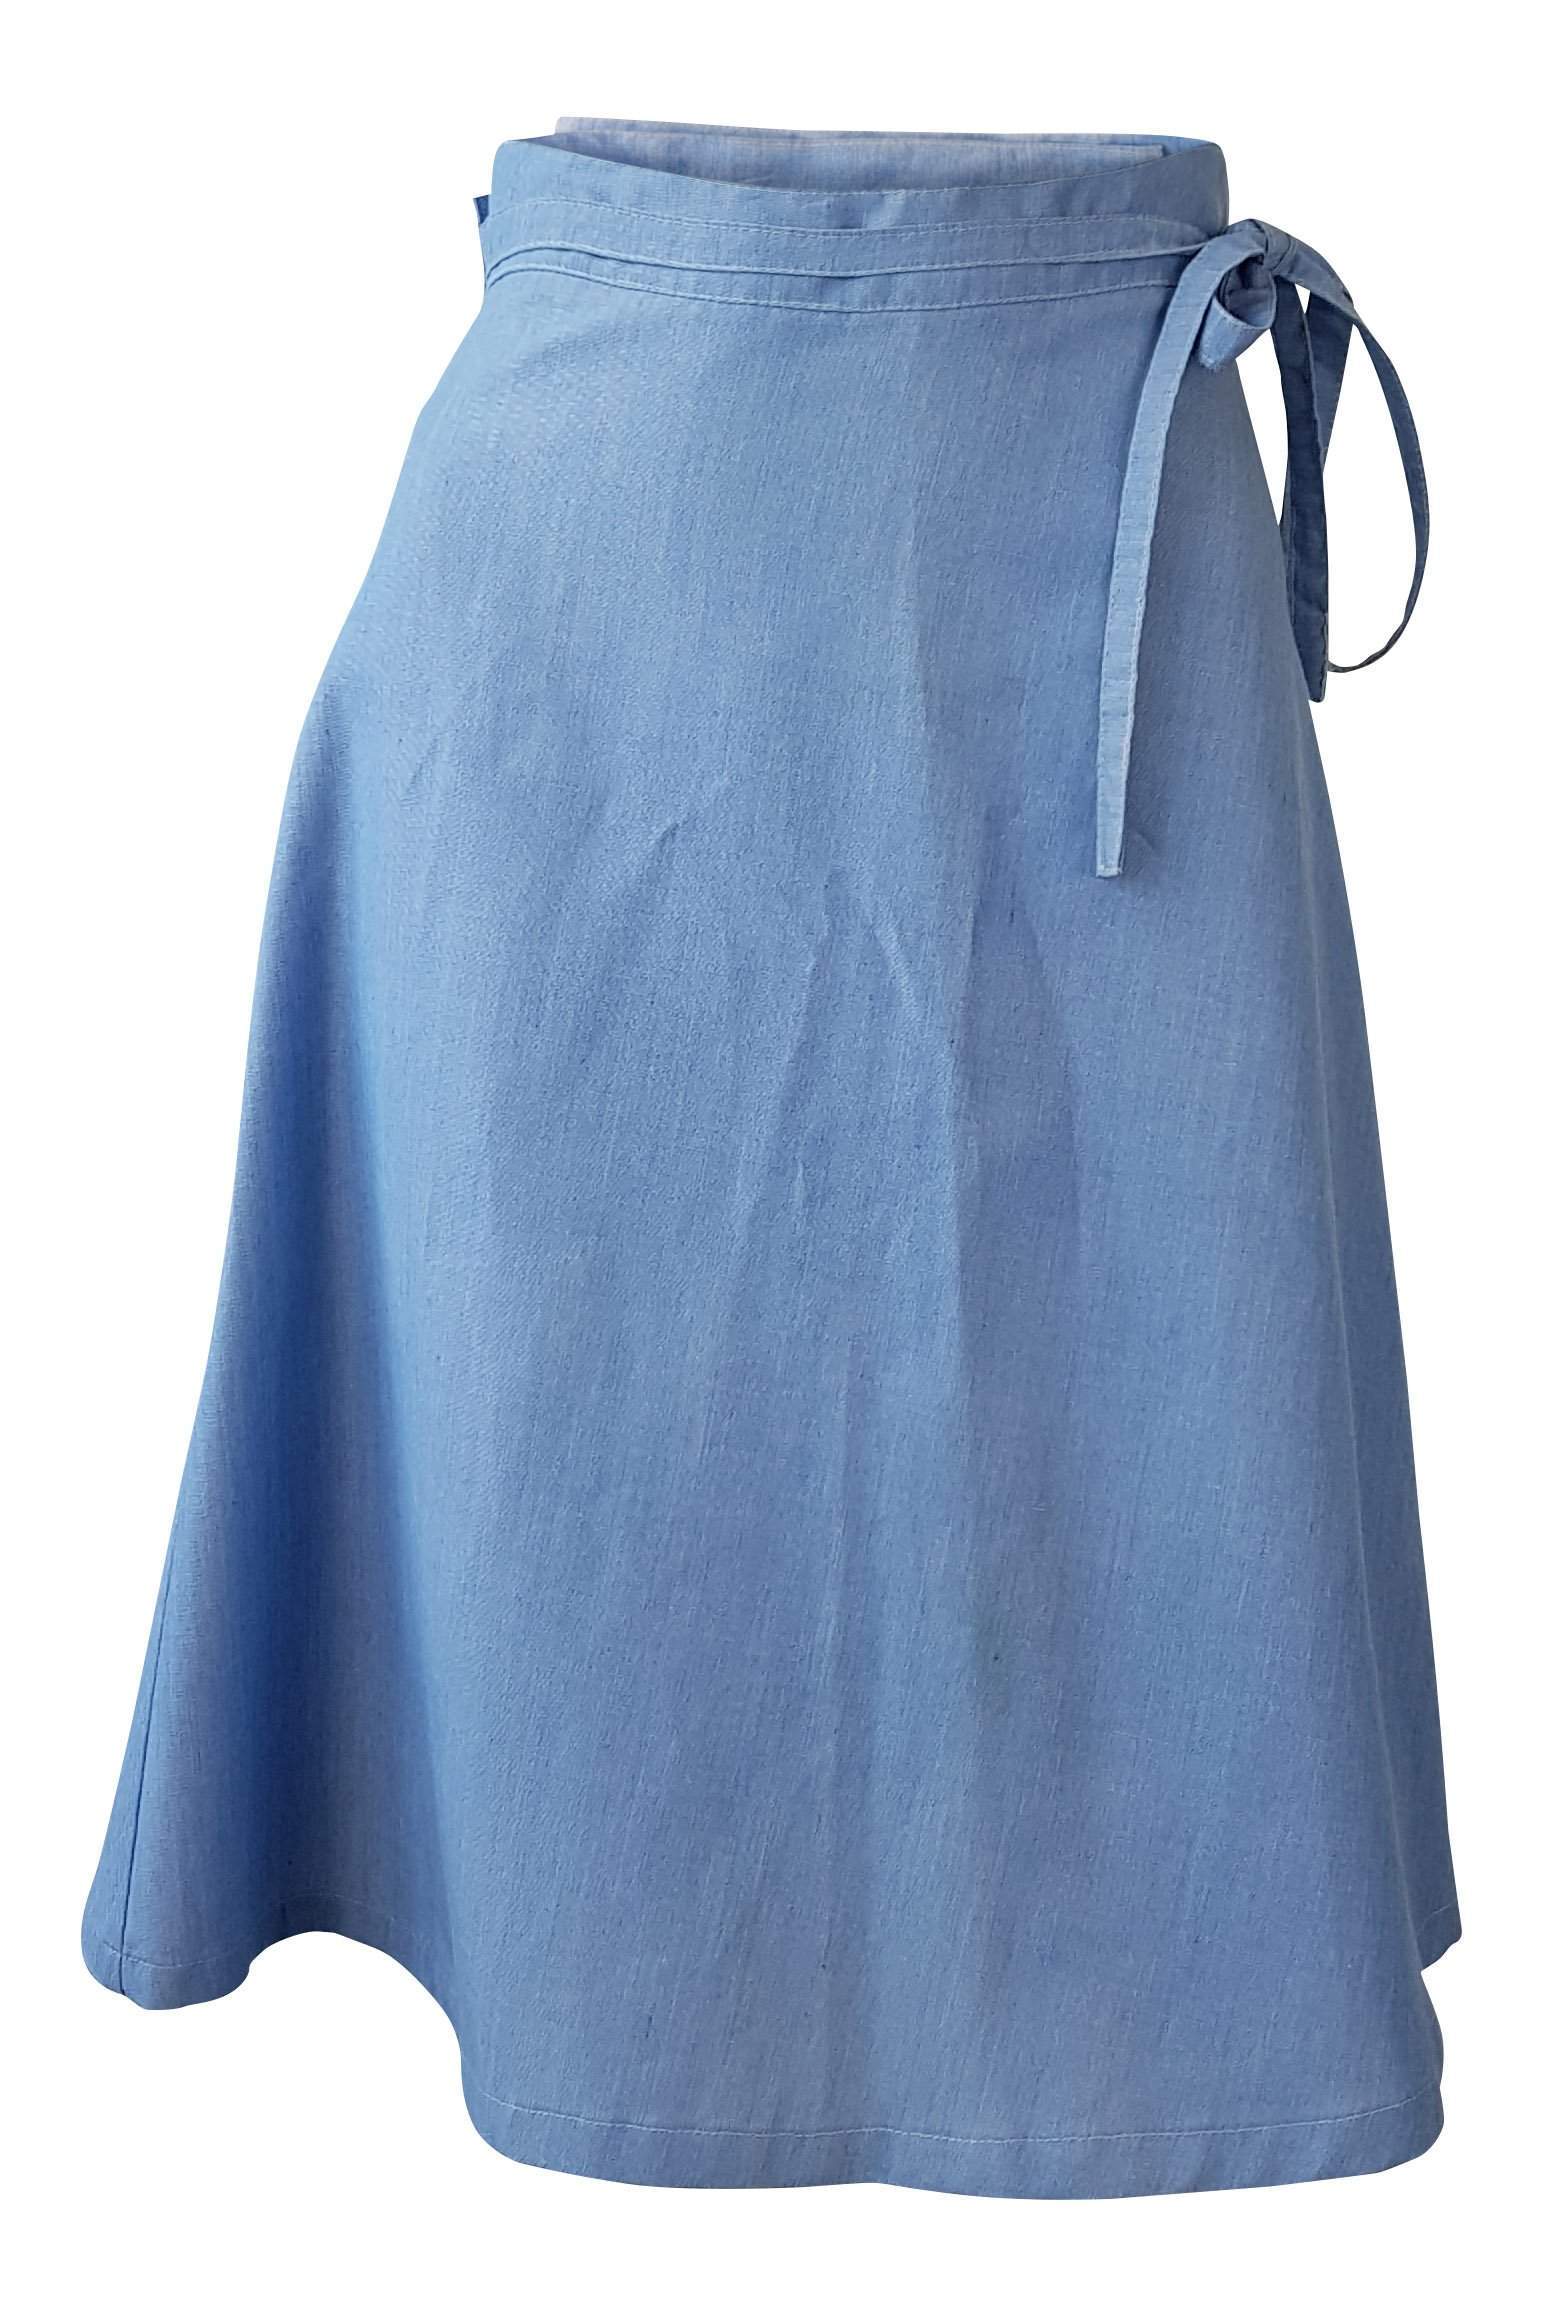 BRIAN Vintage Blue Cotton Wrap Around Knee Length Skirt (UK 12)-Brian-The Freperie